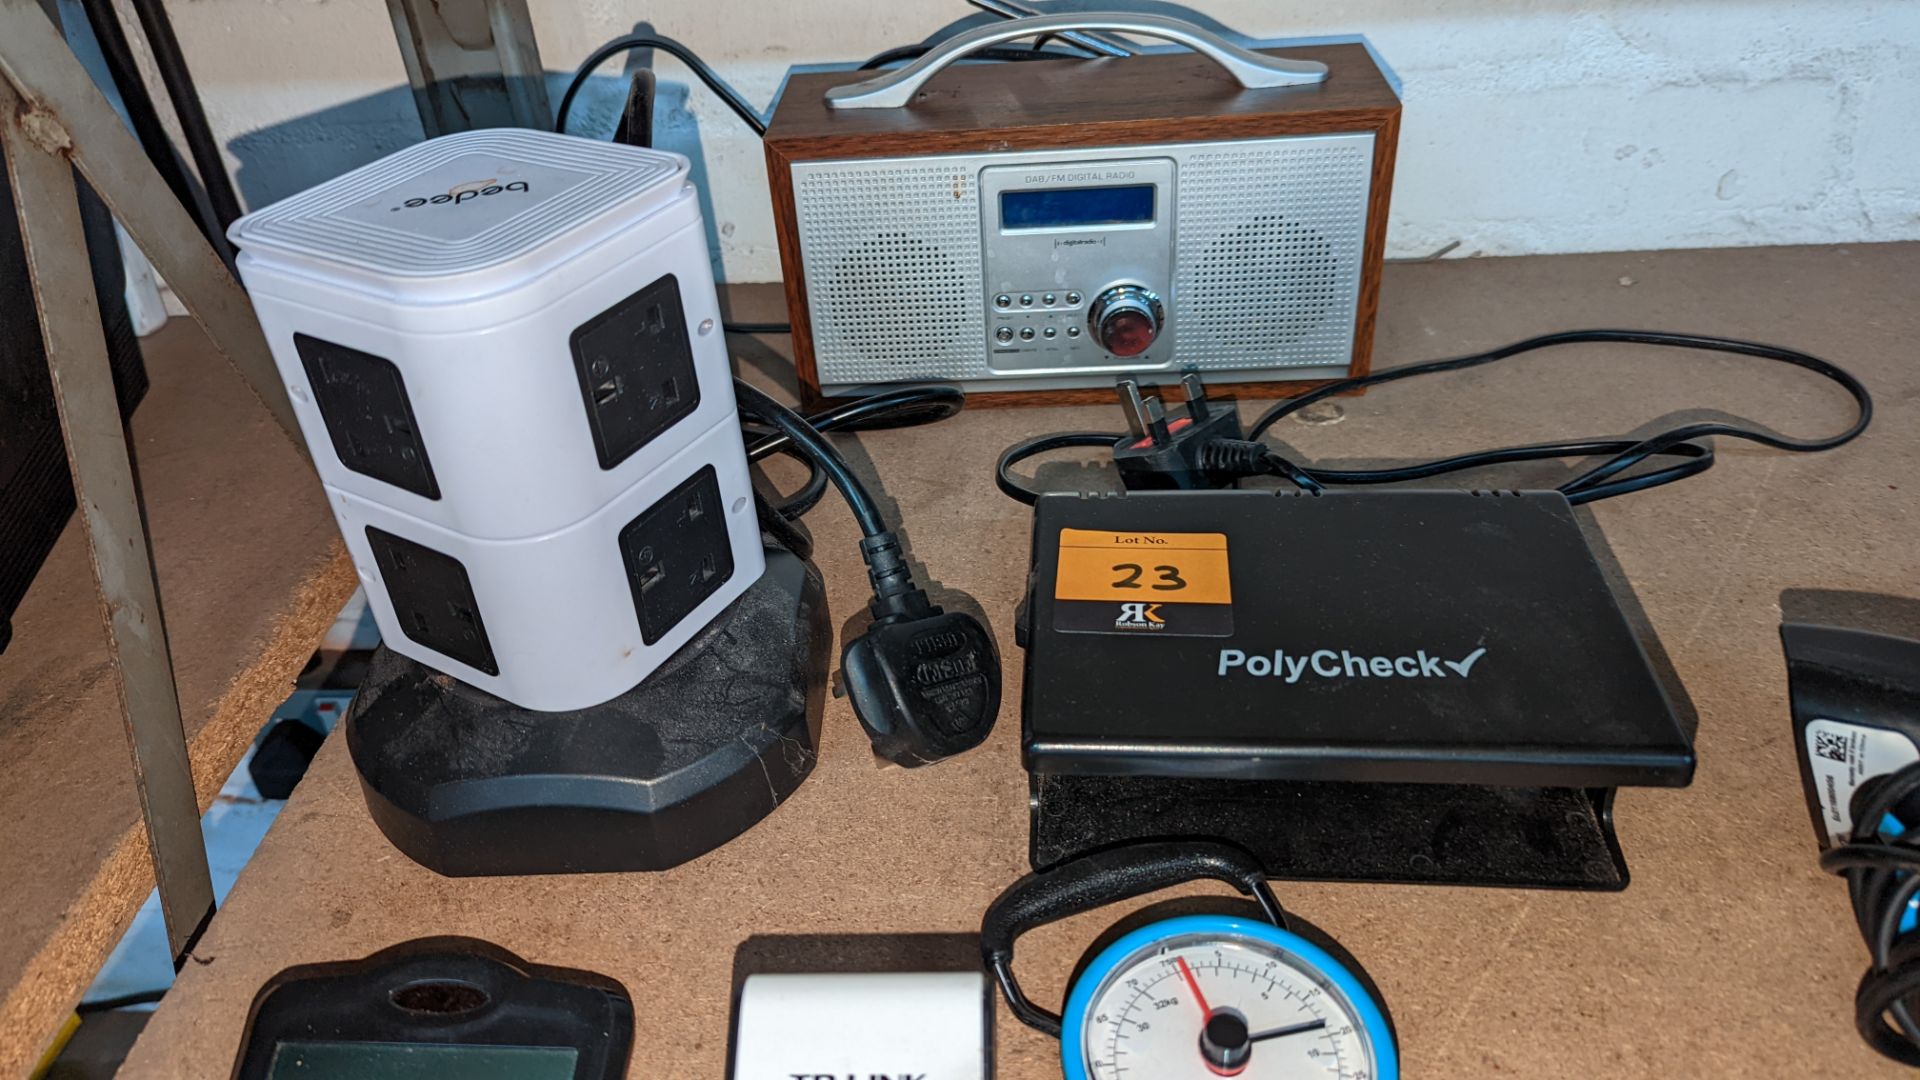 Mixed lot including hand-held barcode reader, Travels scales, Powerline adaptor, DAB radio, note det - Image 4 of 8